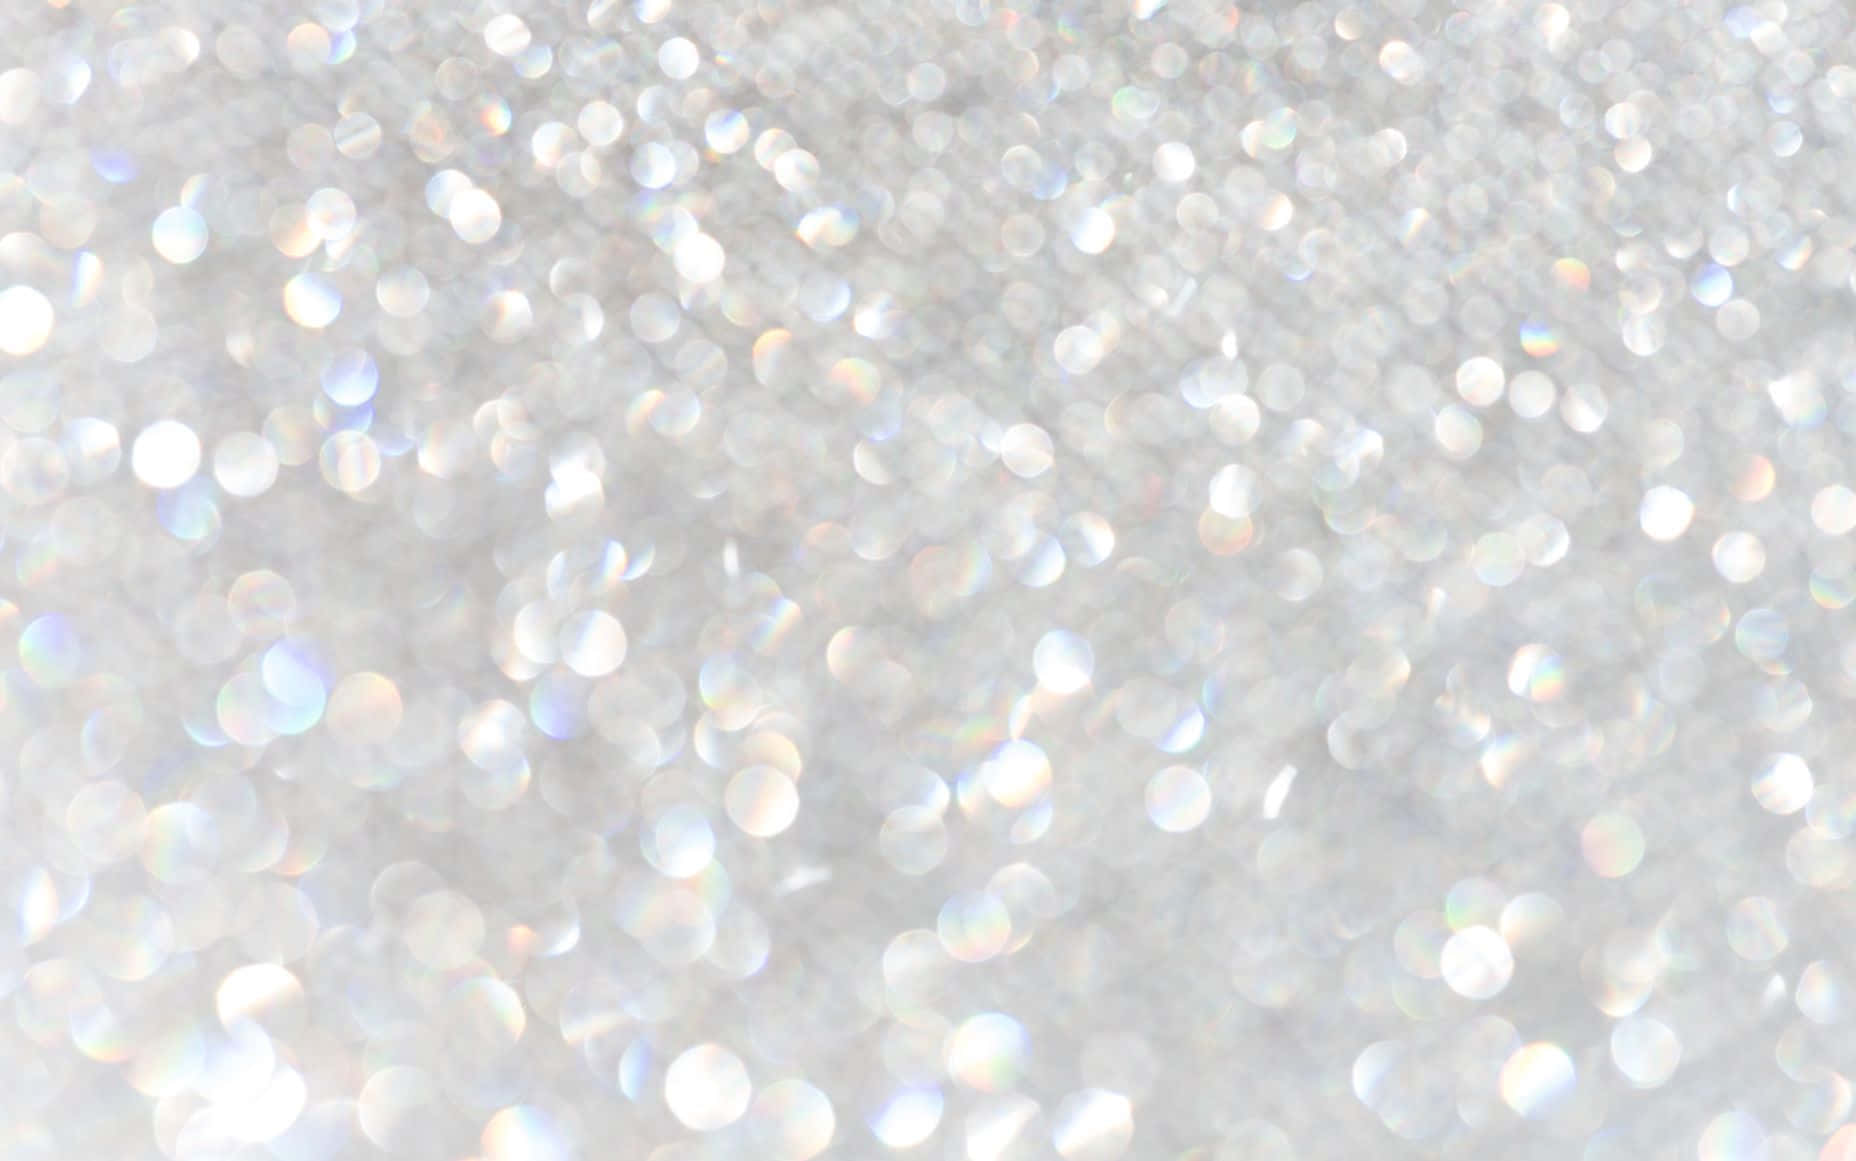 Gold and Silver Glitter Against a White Background Wallpaper